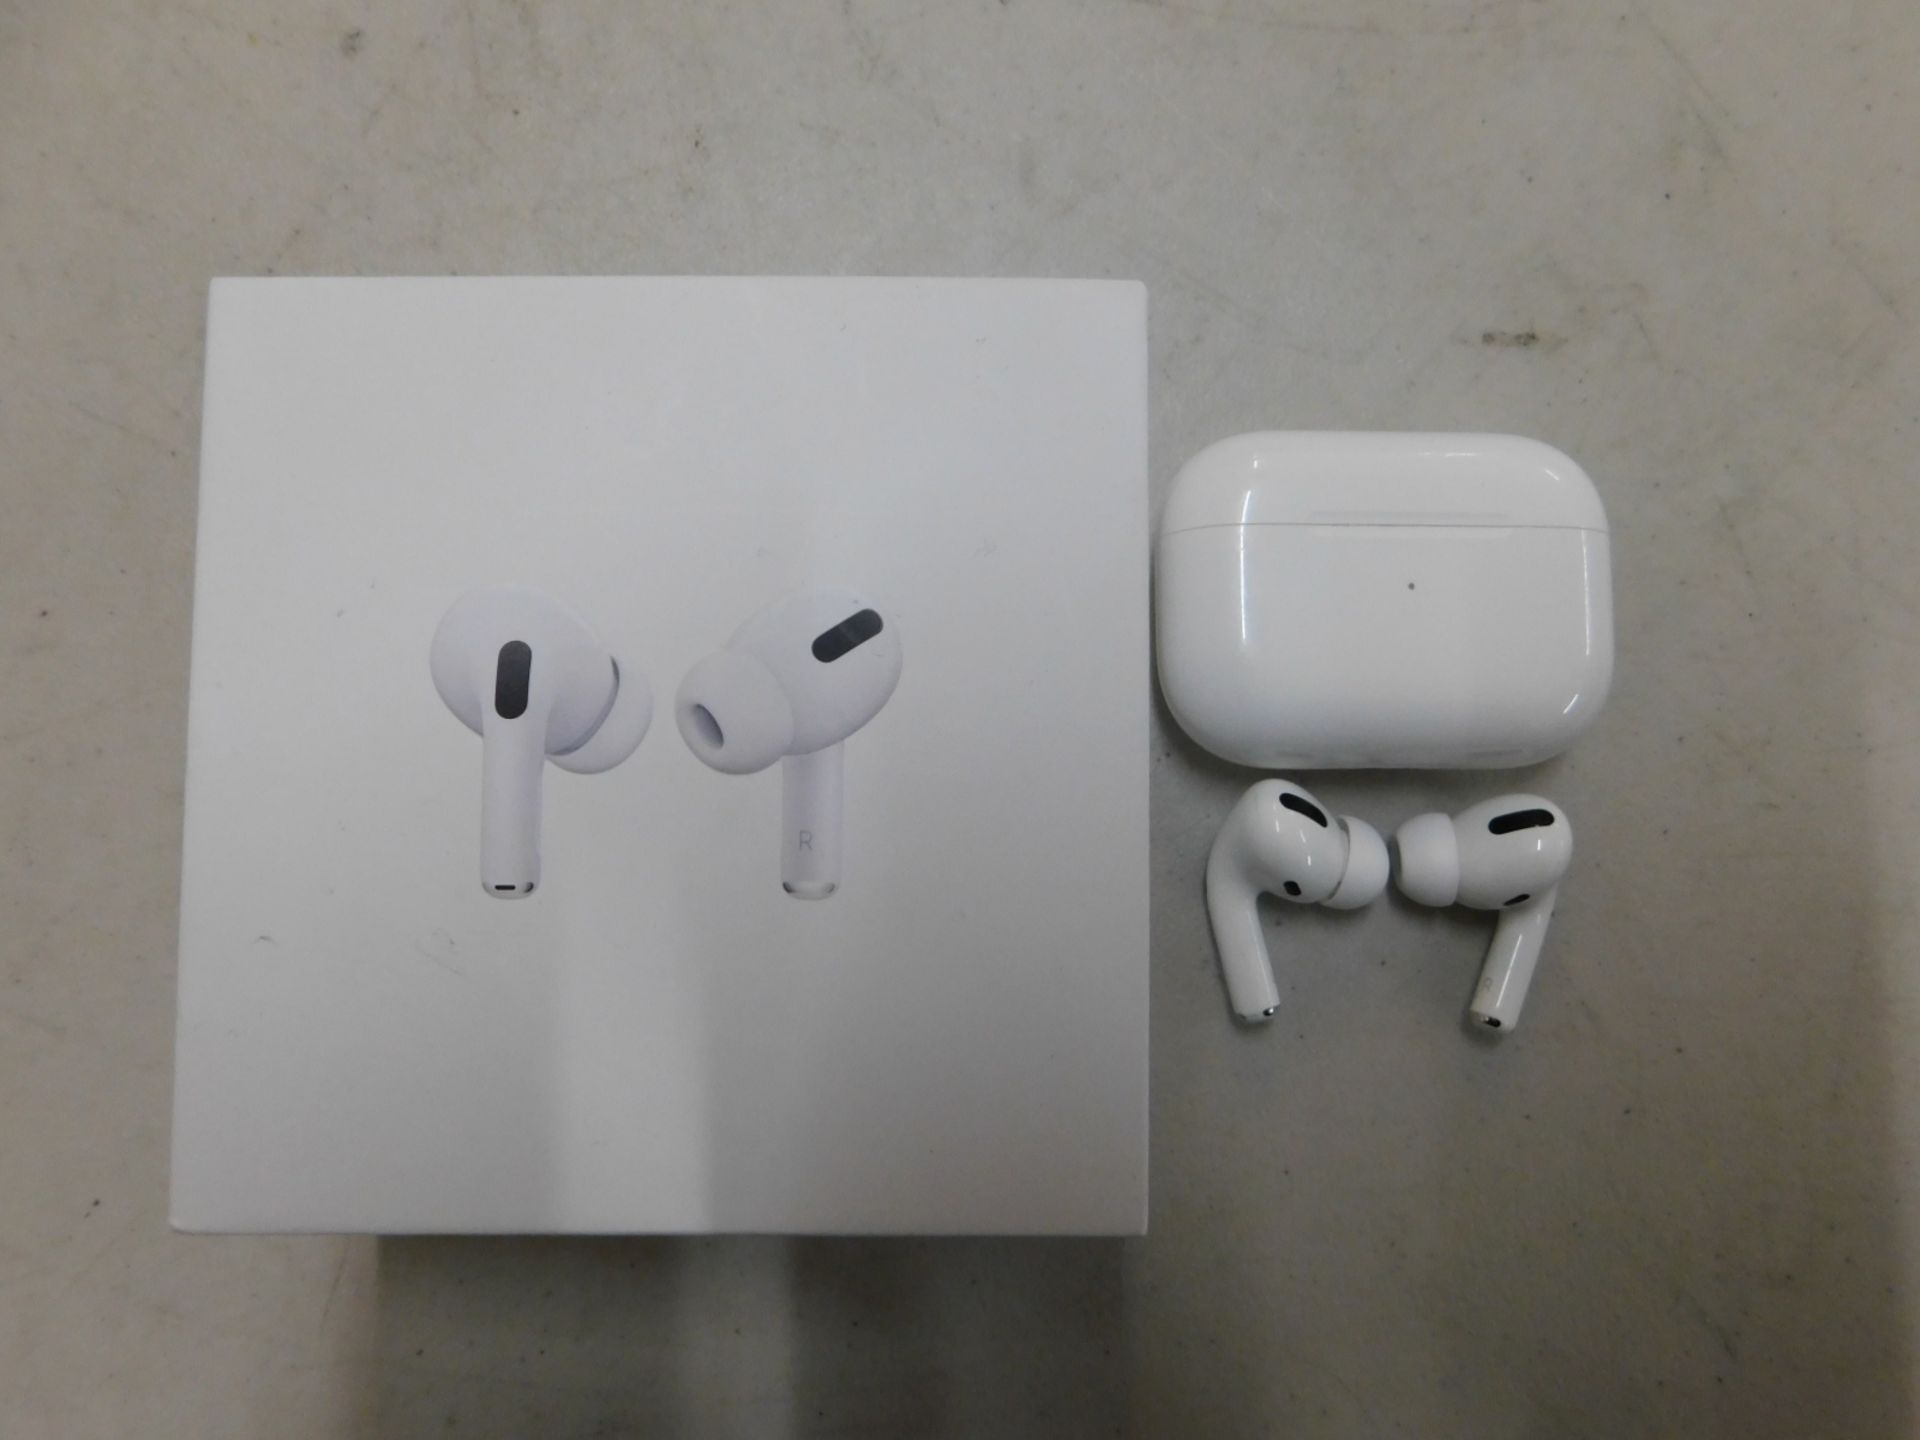 1 BOXED PAIR OF APPLE AIRPODS PRO BLUETOOTH EARPHONES WITH WIRELESS CHARGING CASE RRP Â£229.99